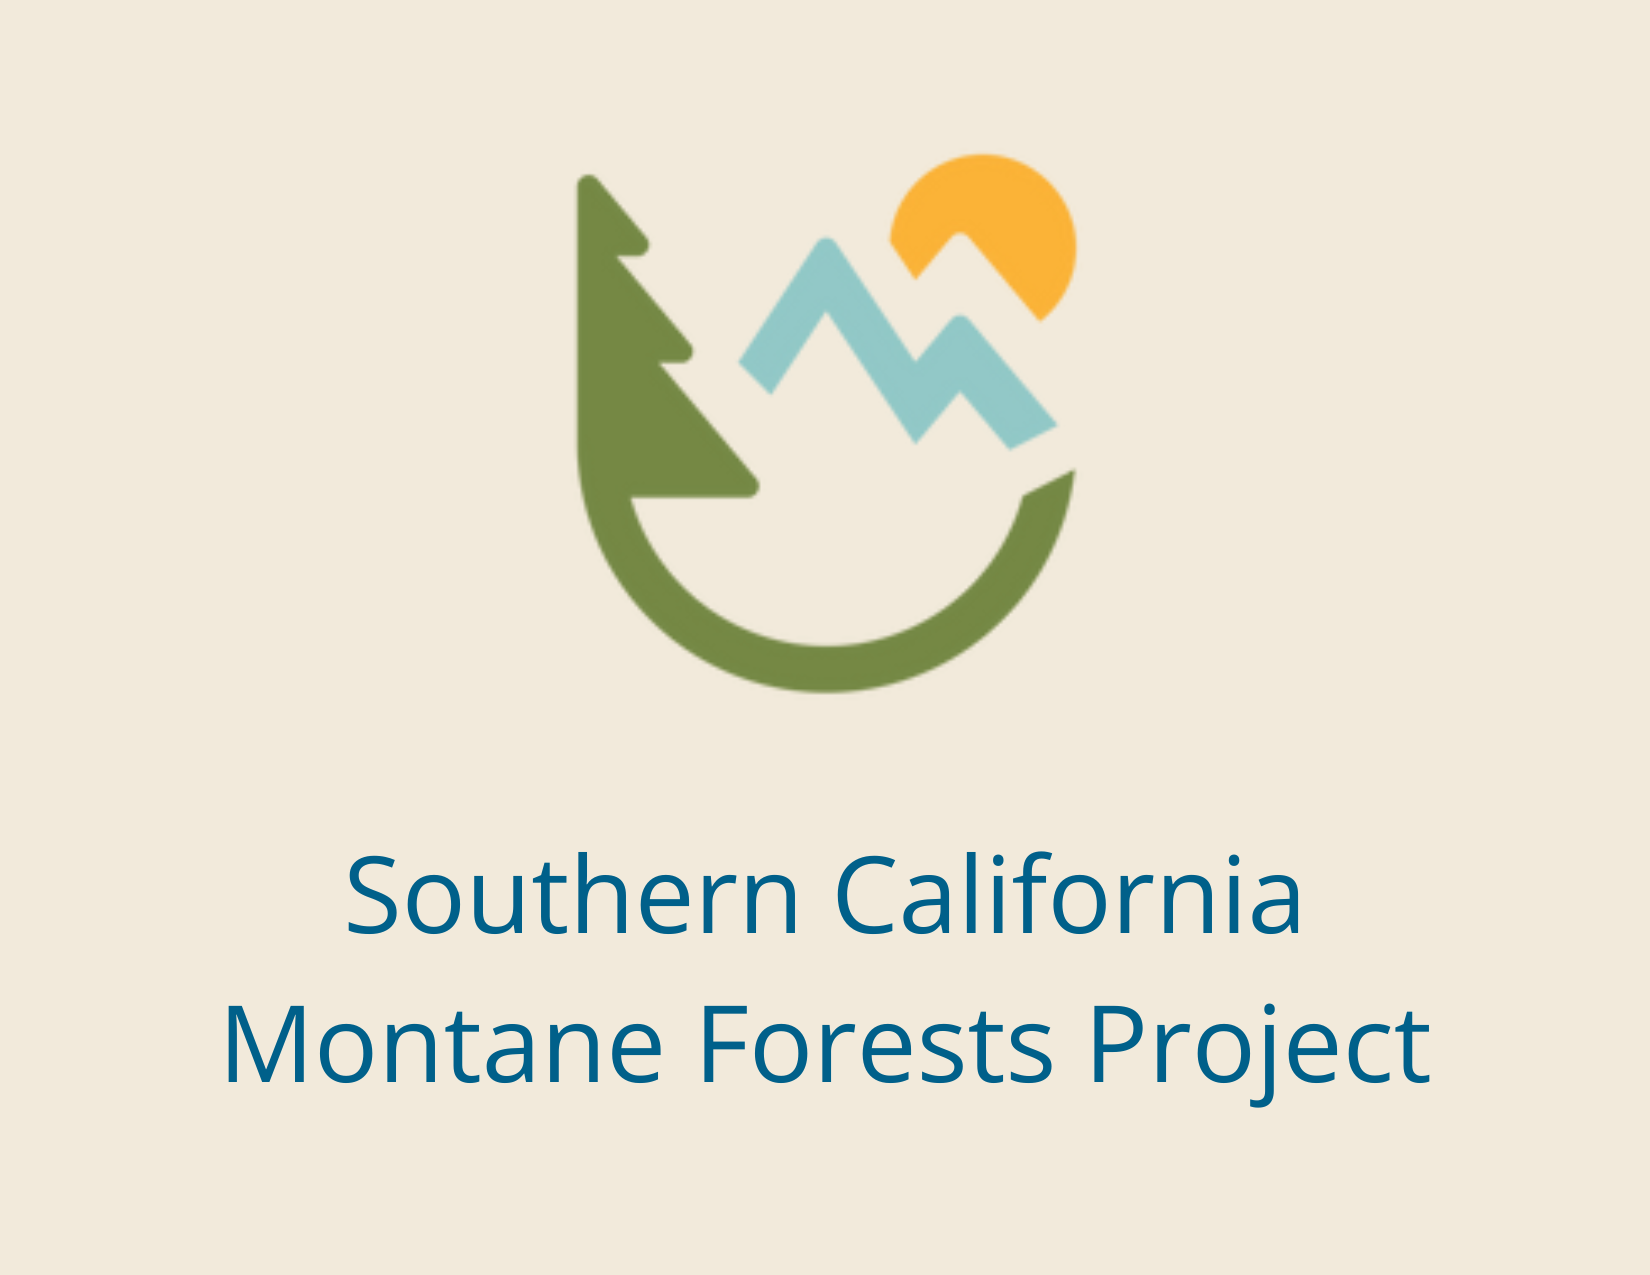 Southern California Montane Forests Project